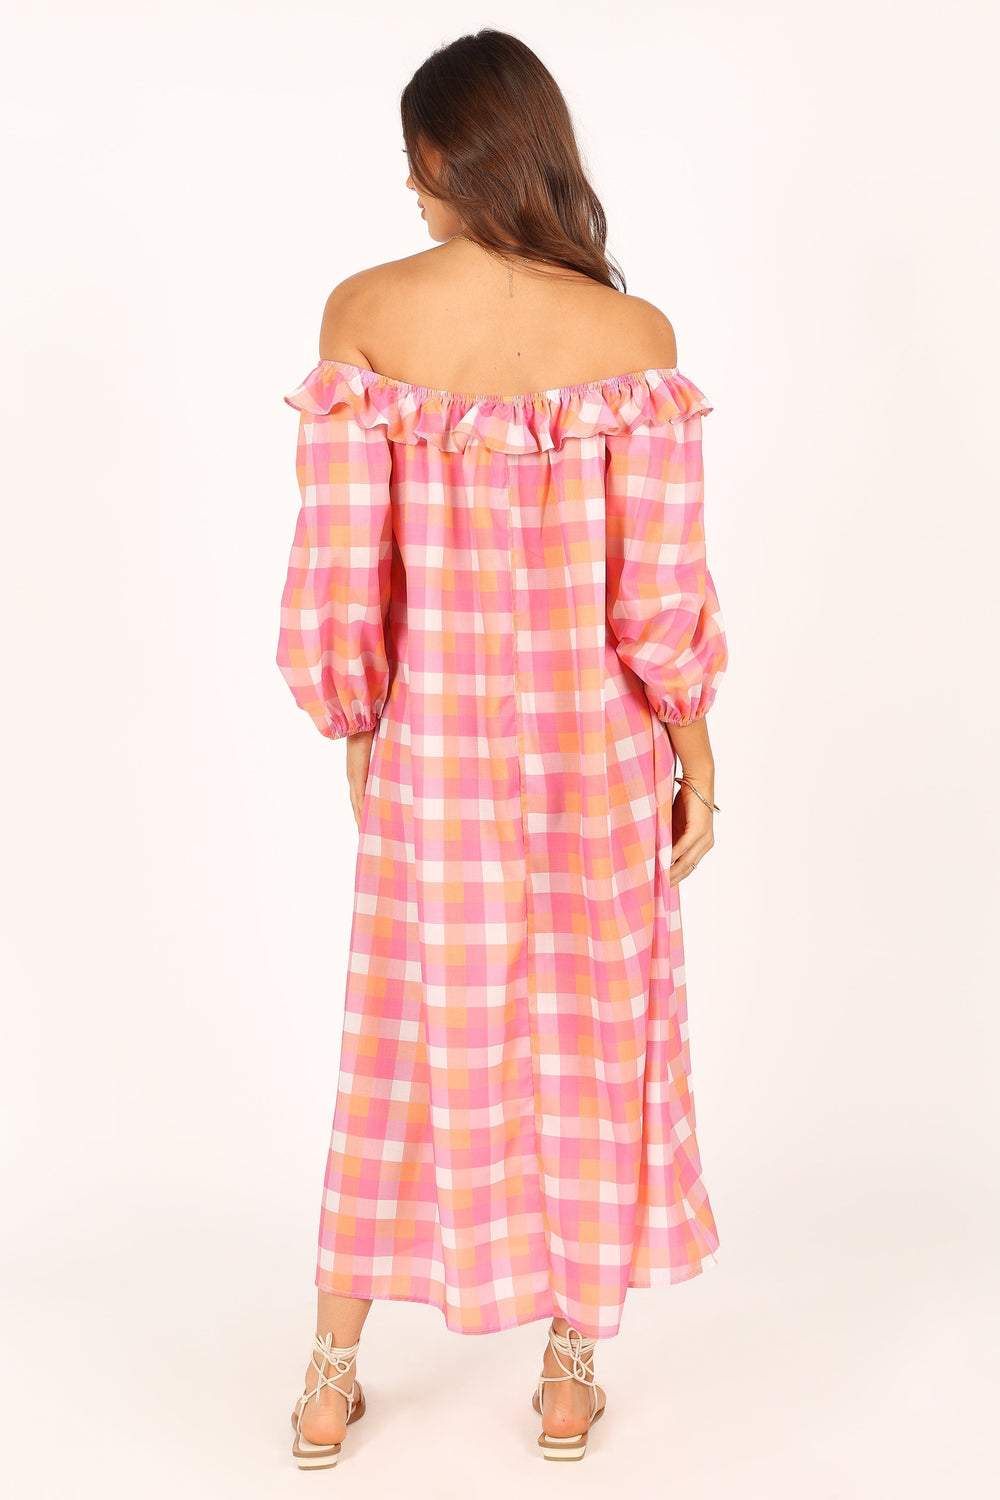 Pink Gingham Dress in Spring - Central Florida Chic